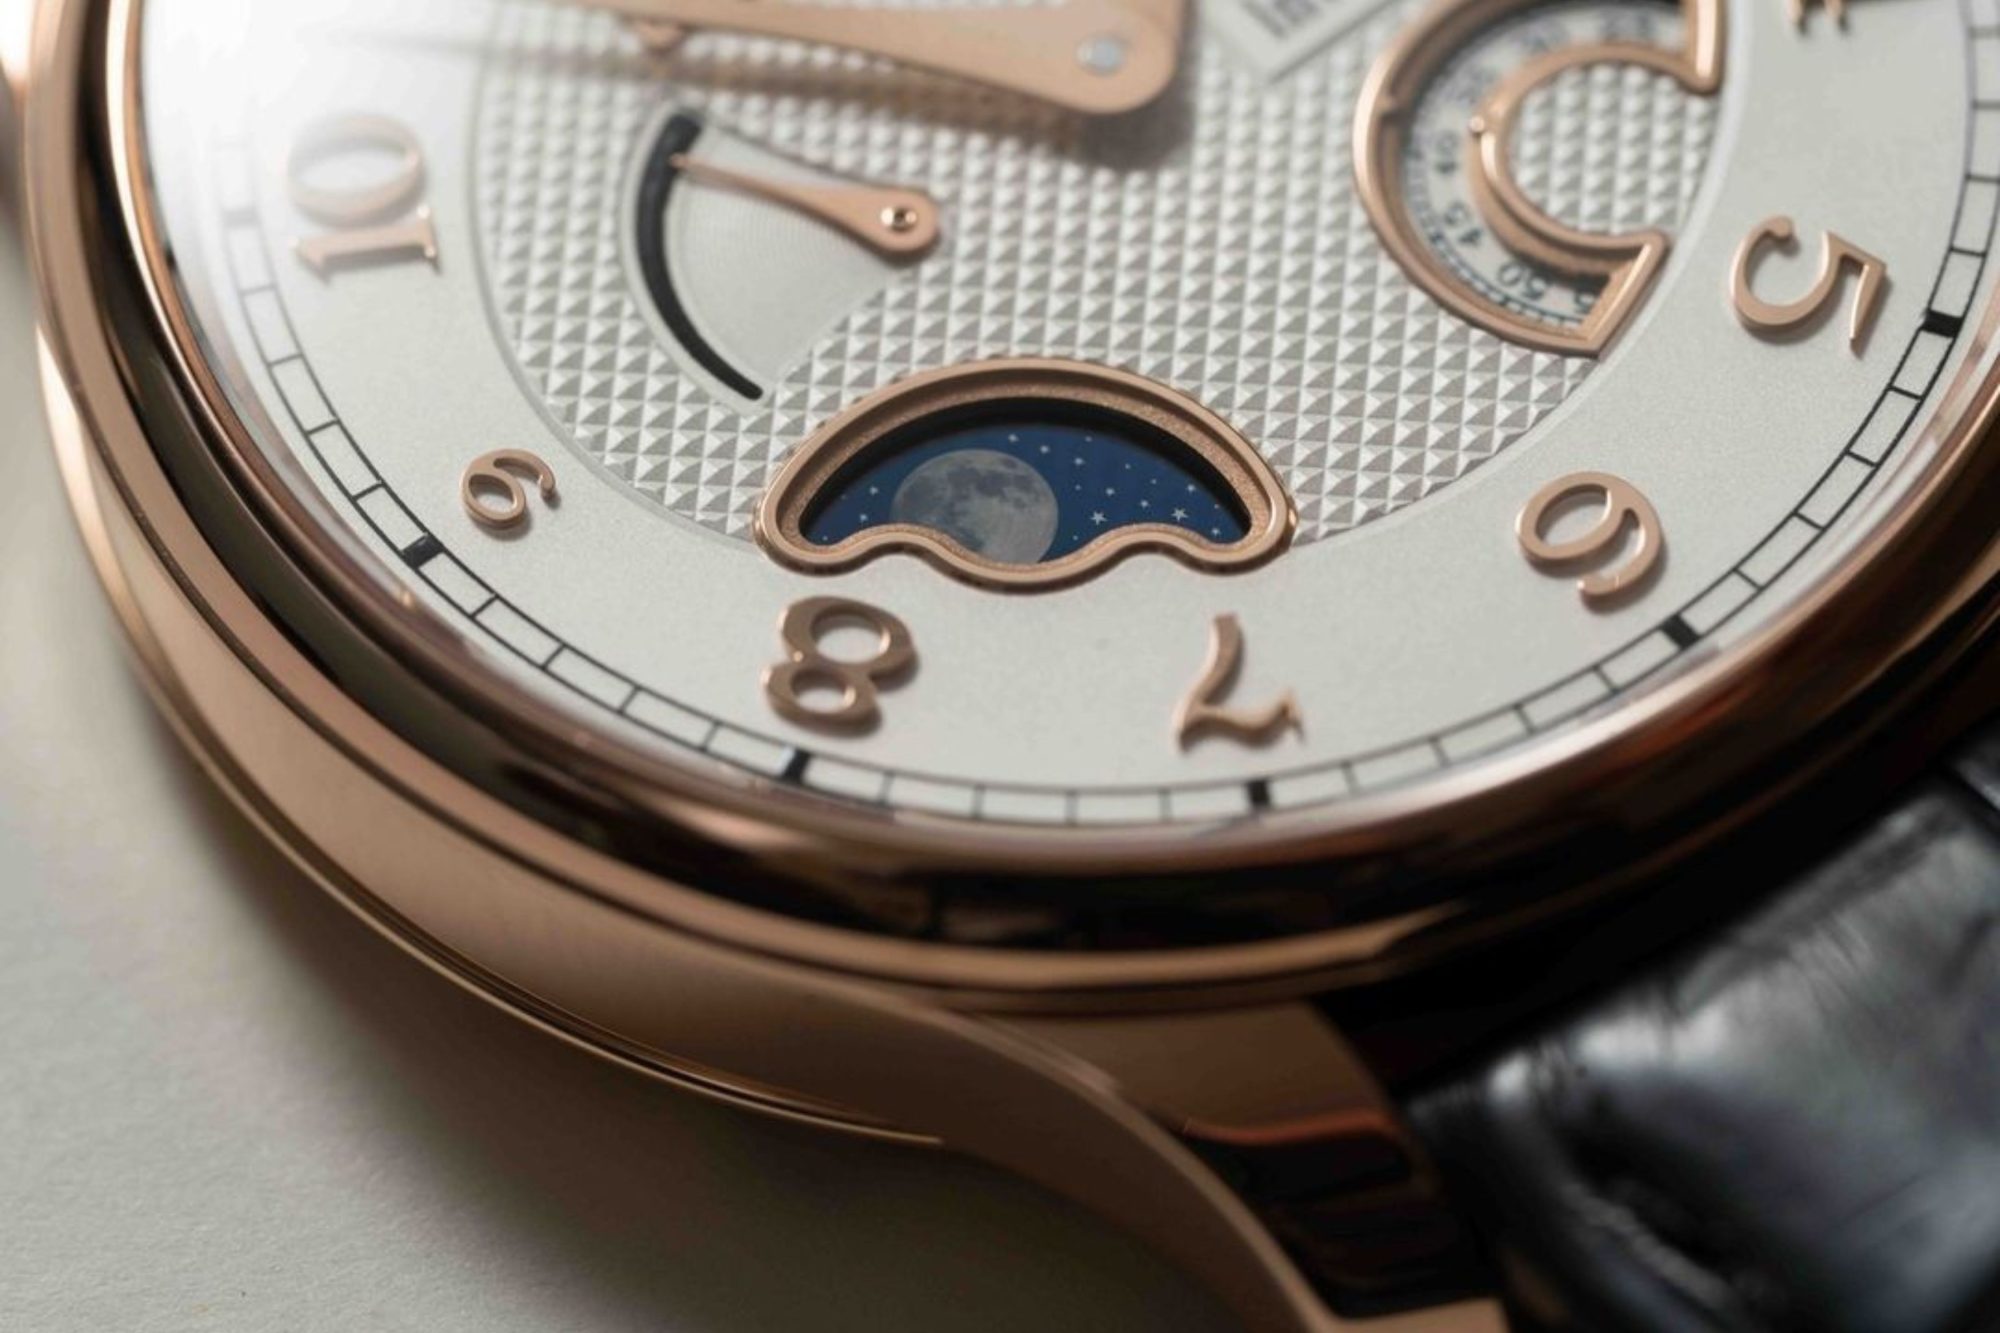 Introducing the F.P.Journe Divine